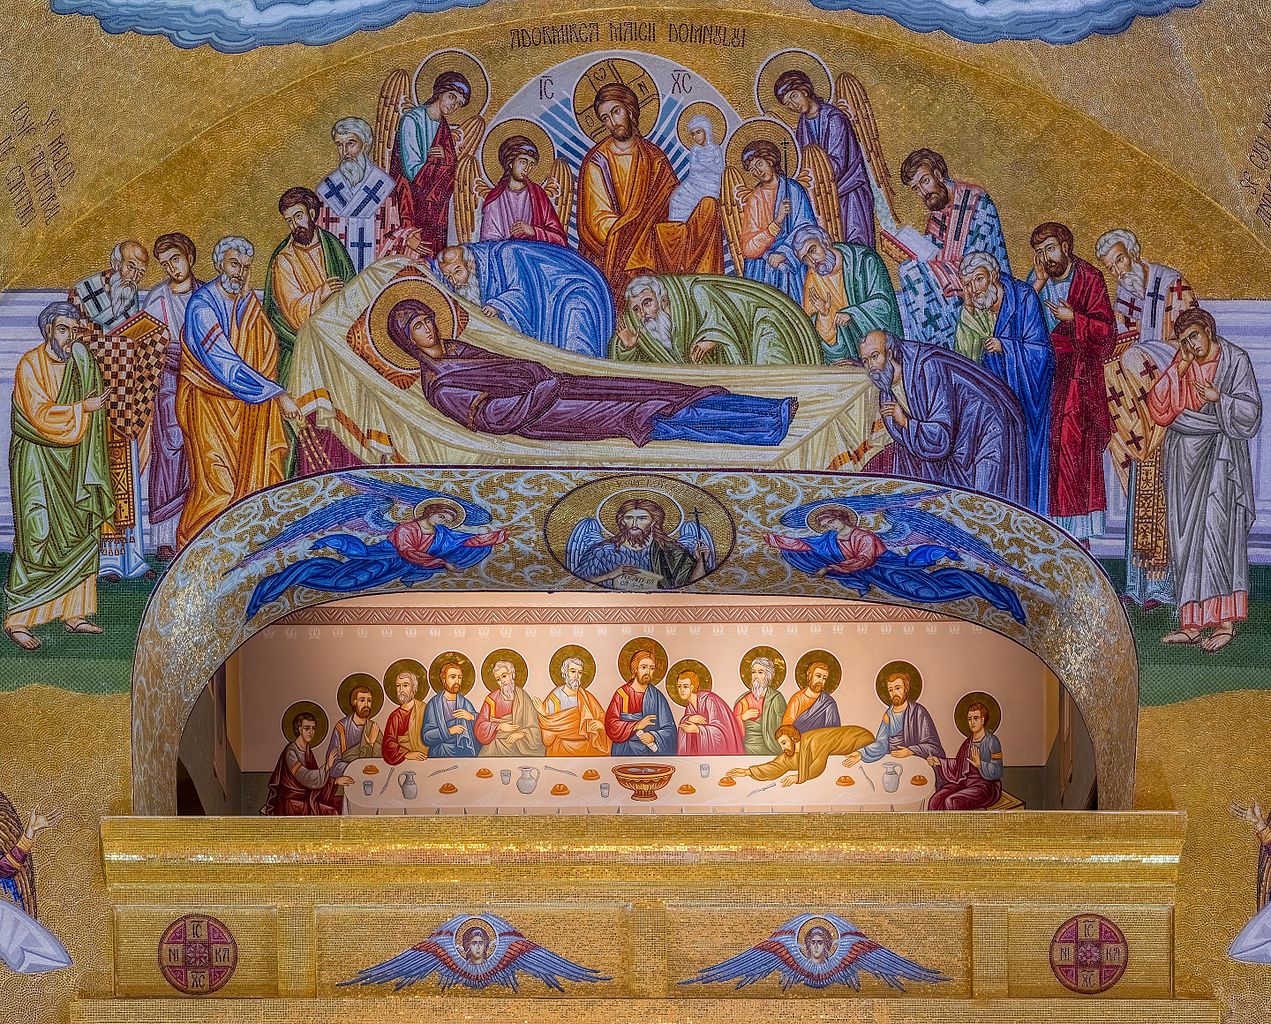 Painting of the Last Supper and mosaic of the Death of the Virgin, Cocoș Monastery, Romania. The monastery, located in a forest clearing 6 km of Niculițel, was built between 1883 and 1913 and is dedicated to the Dormition of the Theotokos.